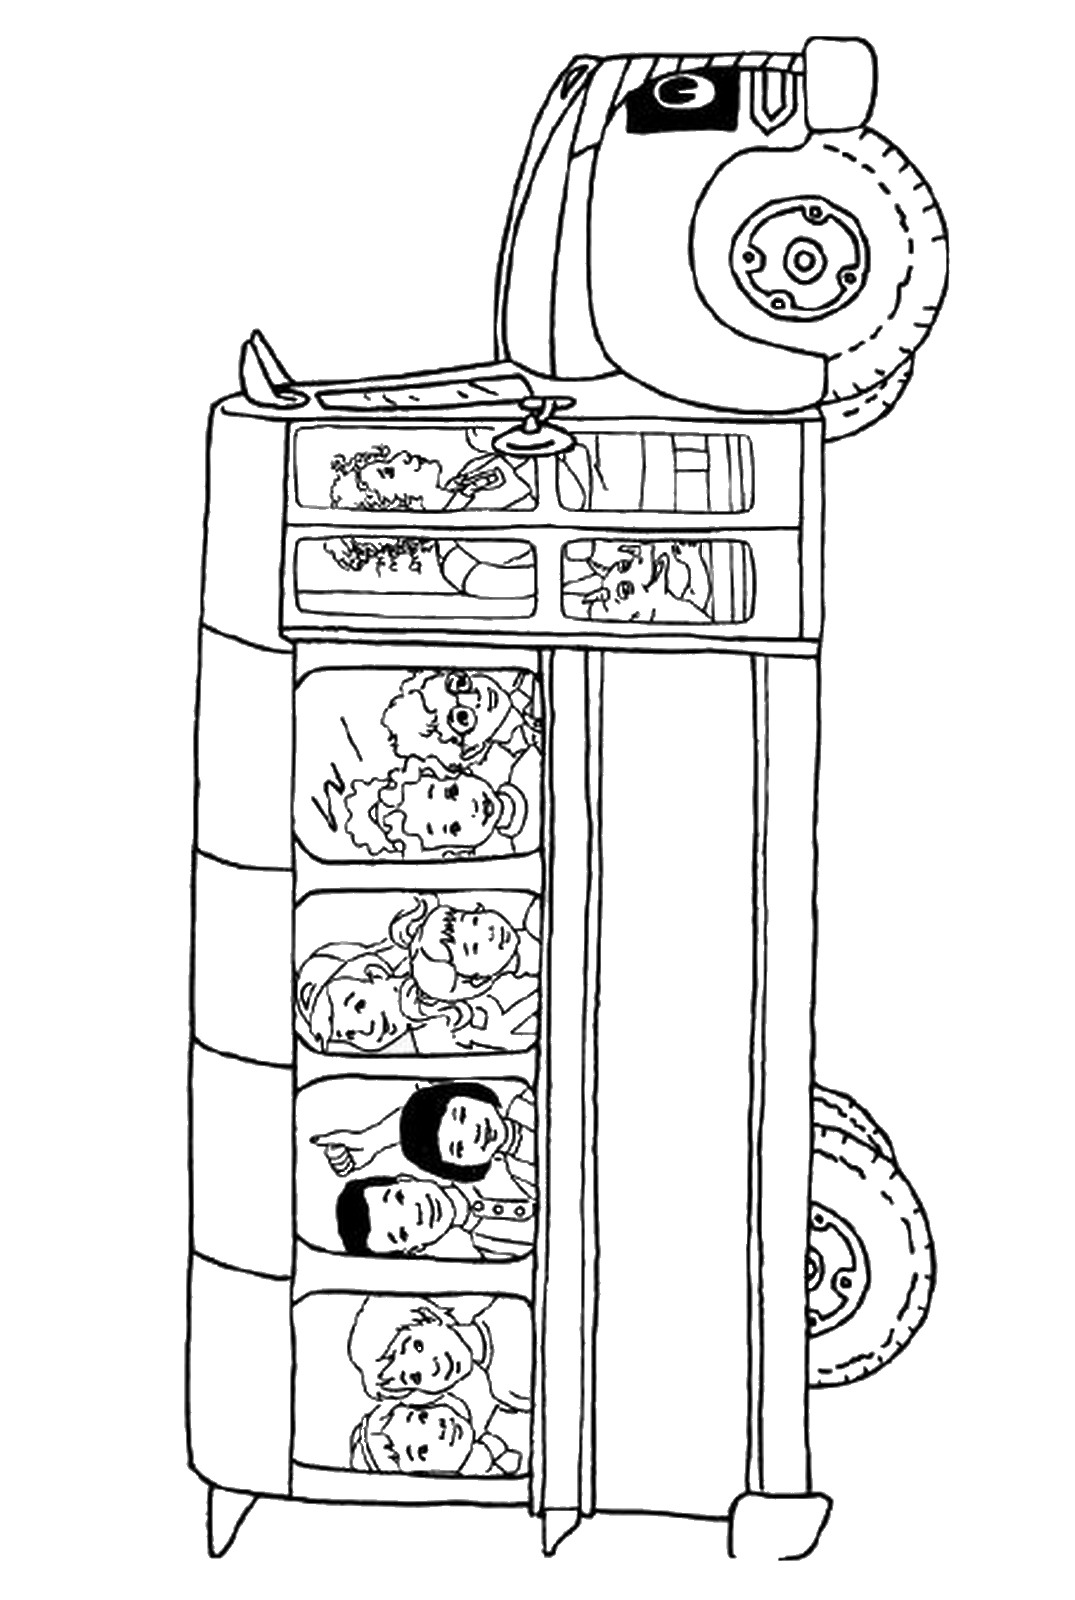 Kids On The Magic School Bus Coloring Page